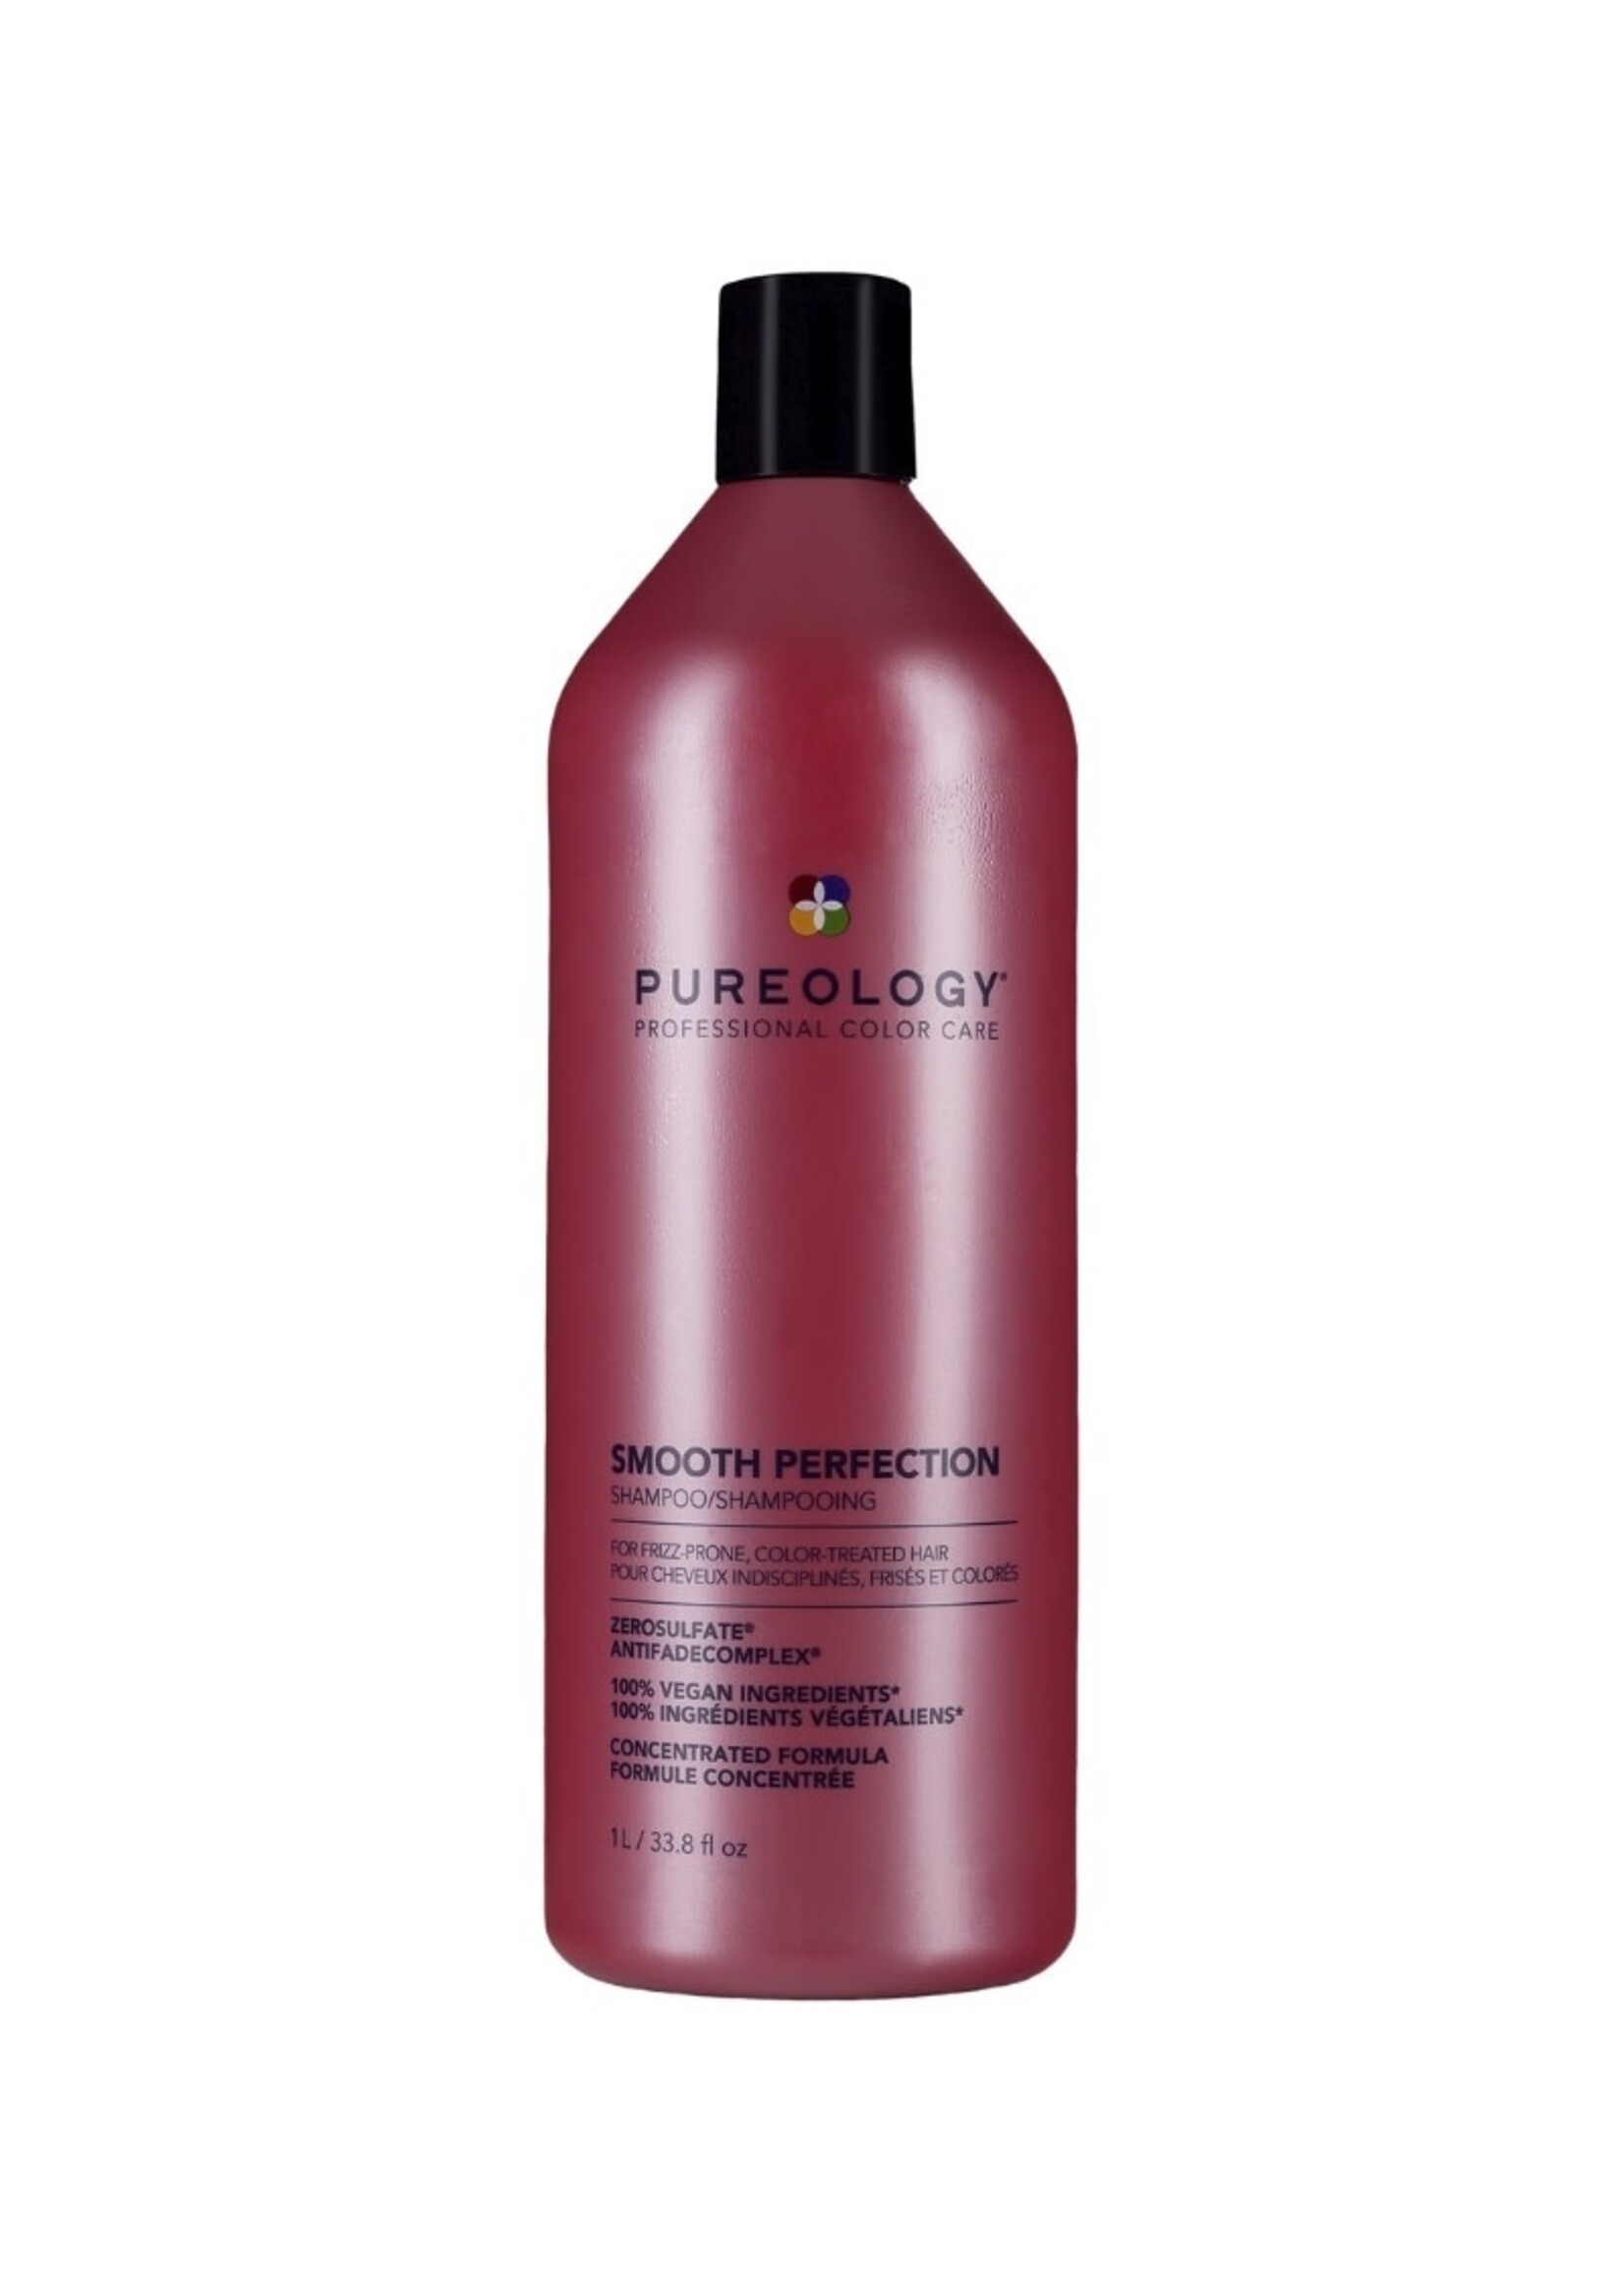 Pureology Smooth Perfection Conditioner 266ml - Hair products New